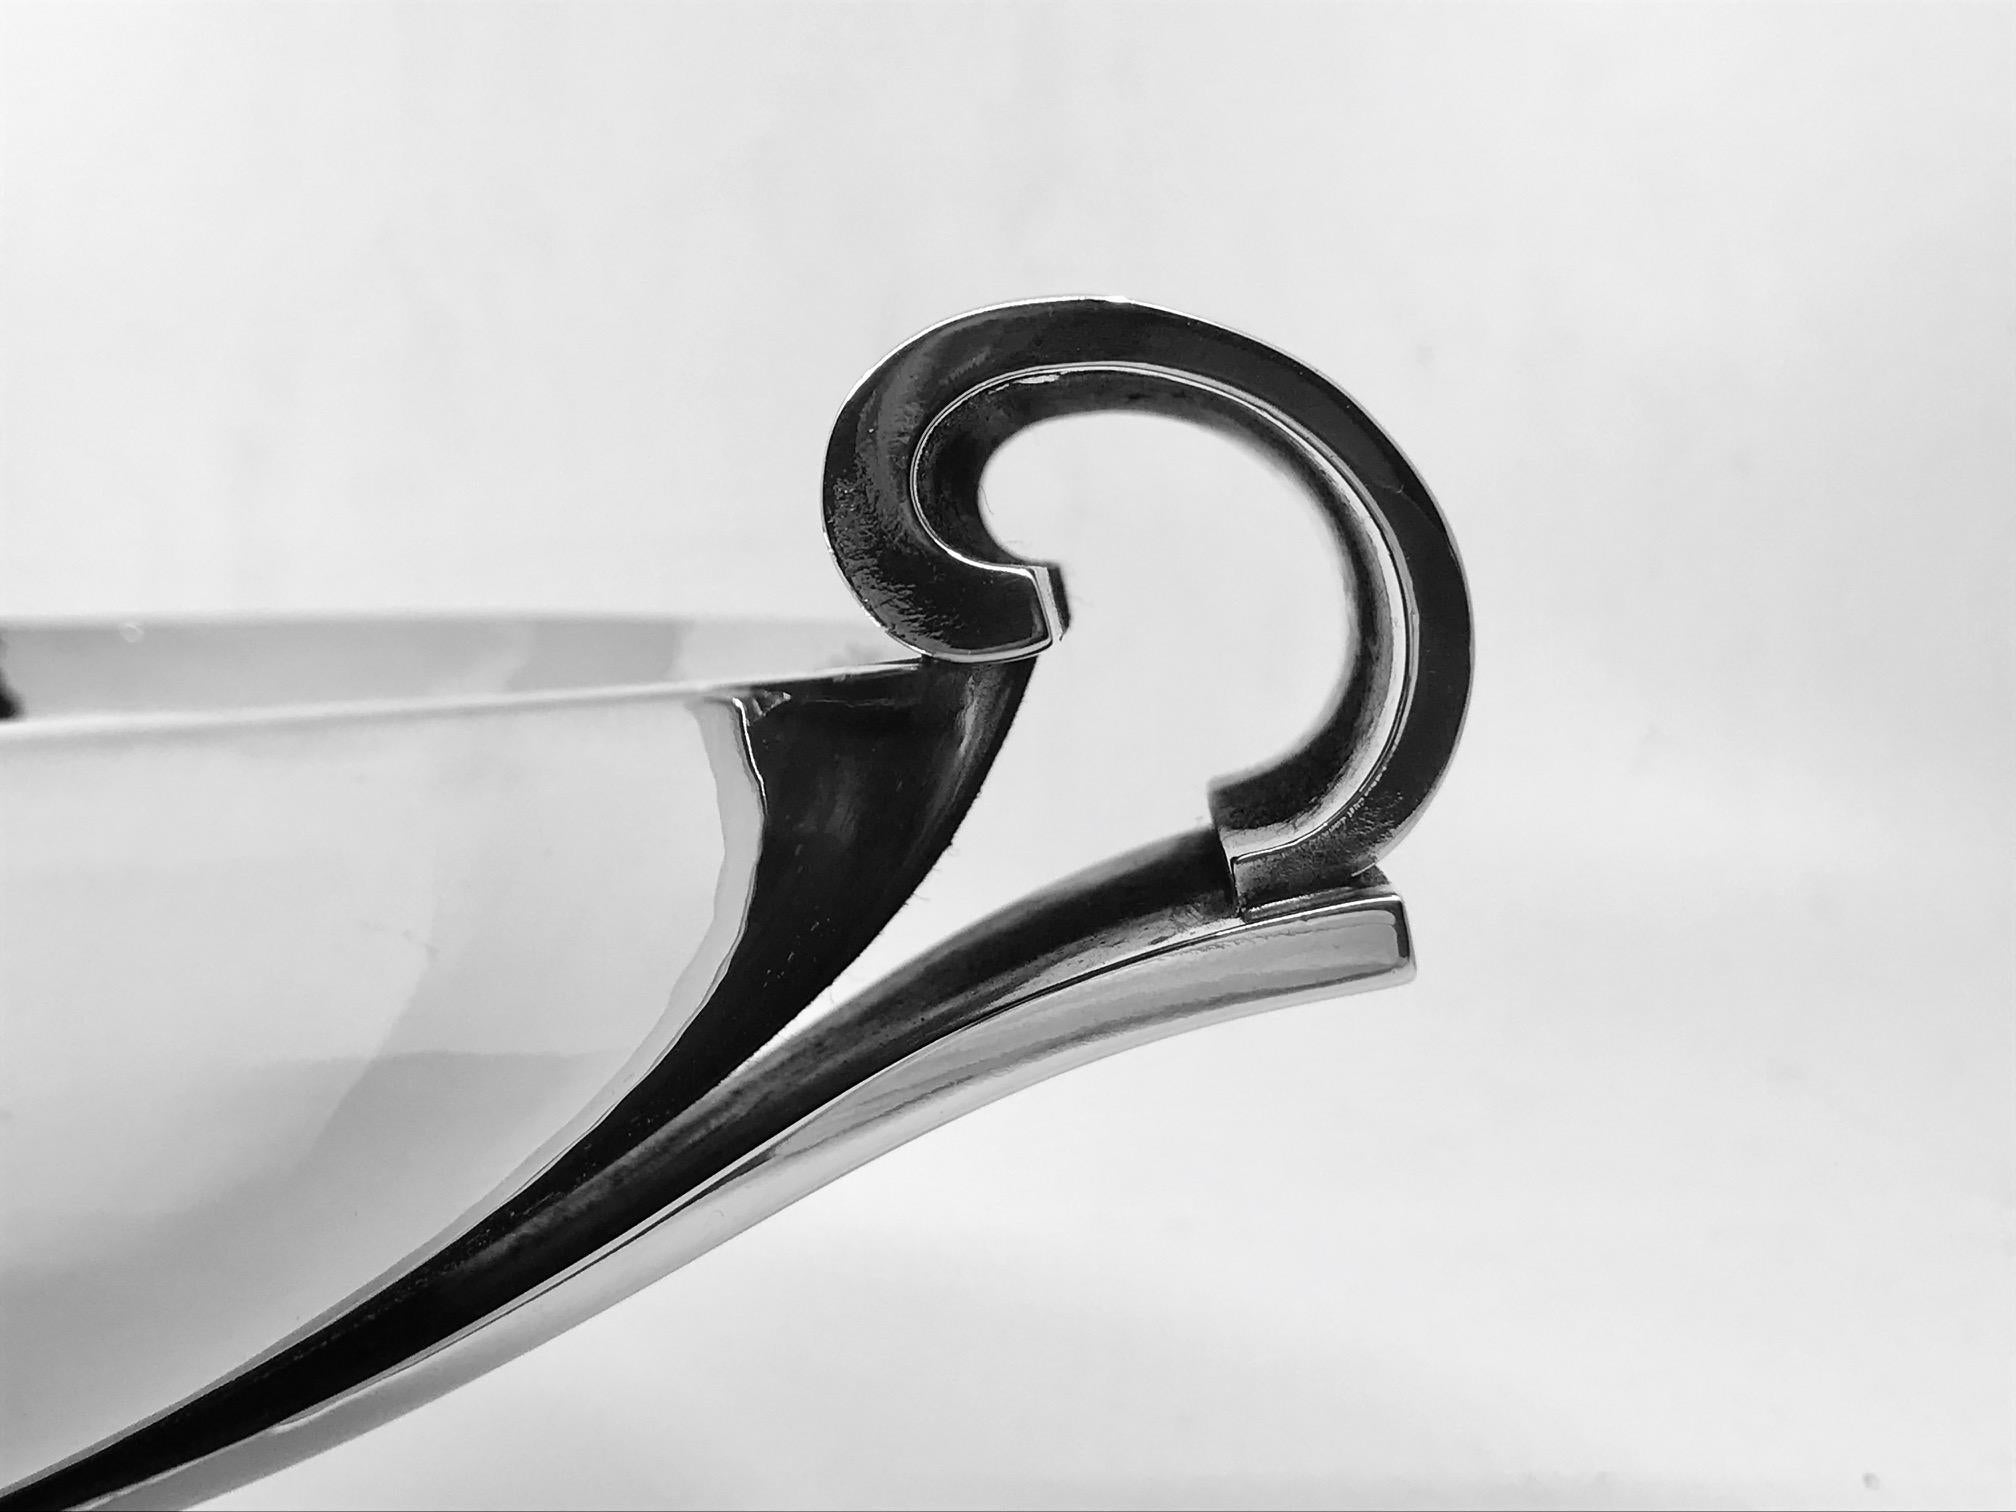 Polished Georg Jensen Art Deco Centerpiece Bowl 752B by Harald Nielsen - 12-207 For Sale